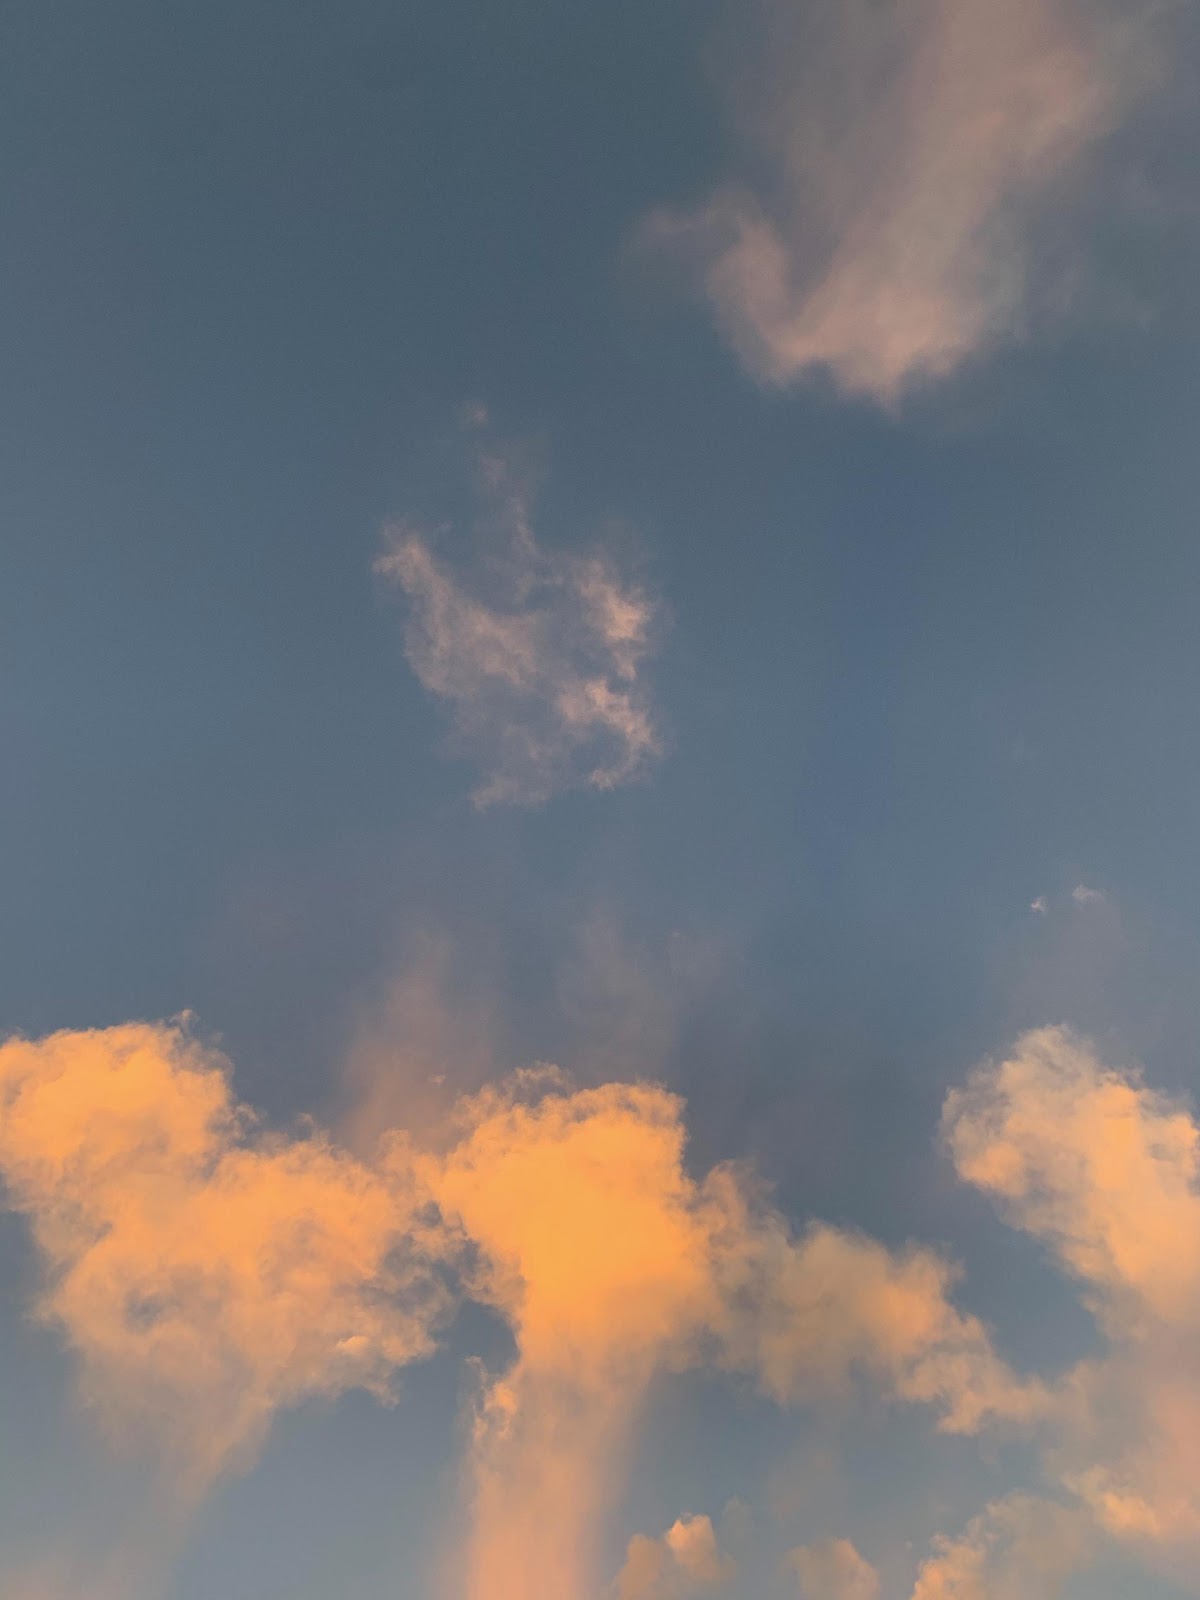 Clouds at Sunset